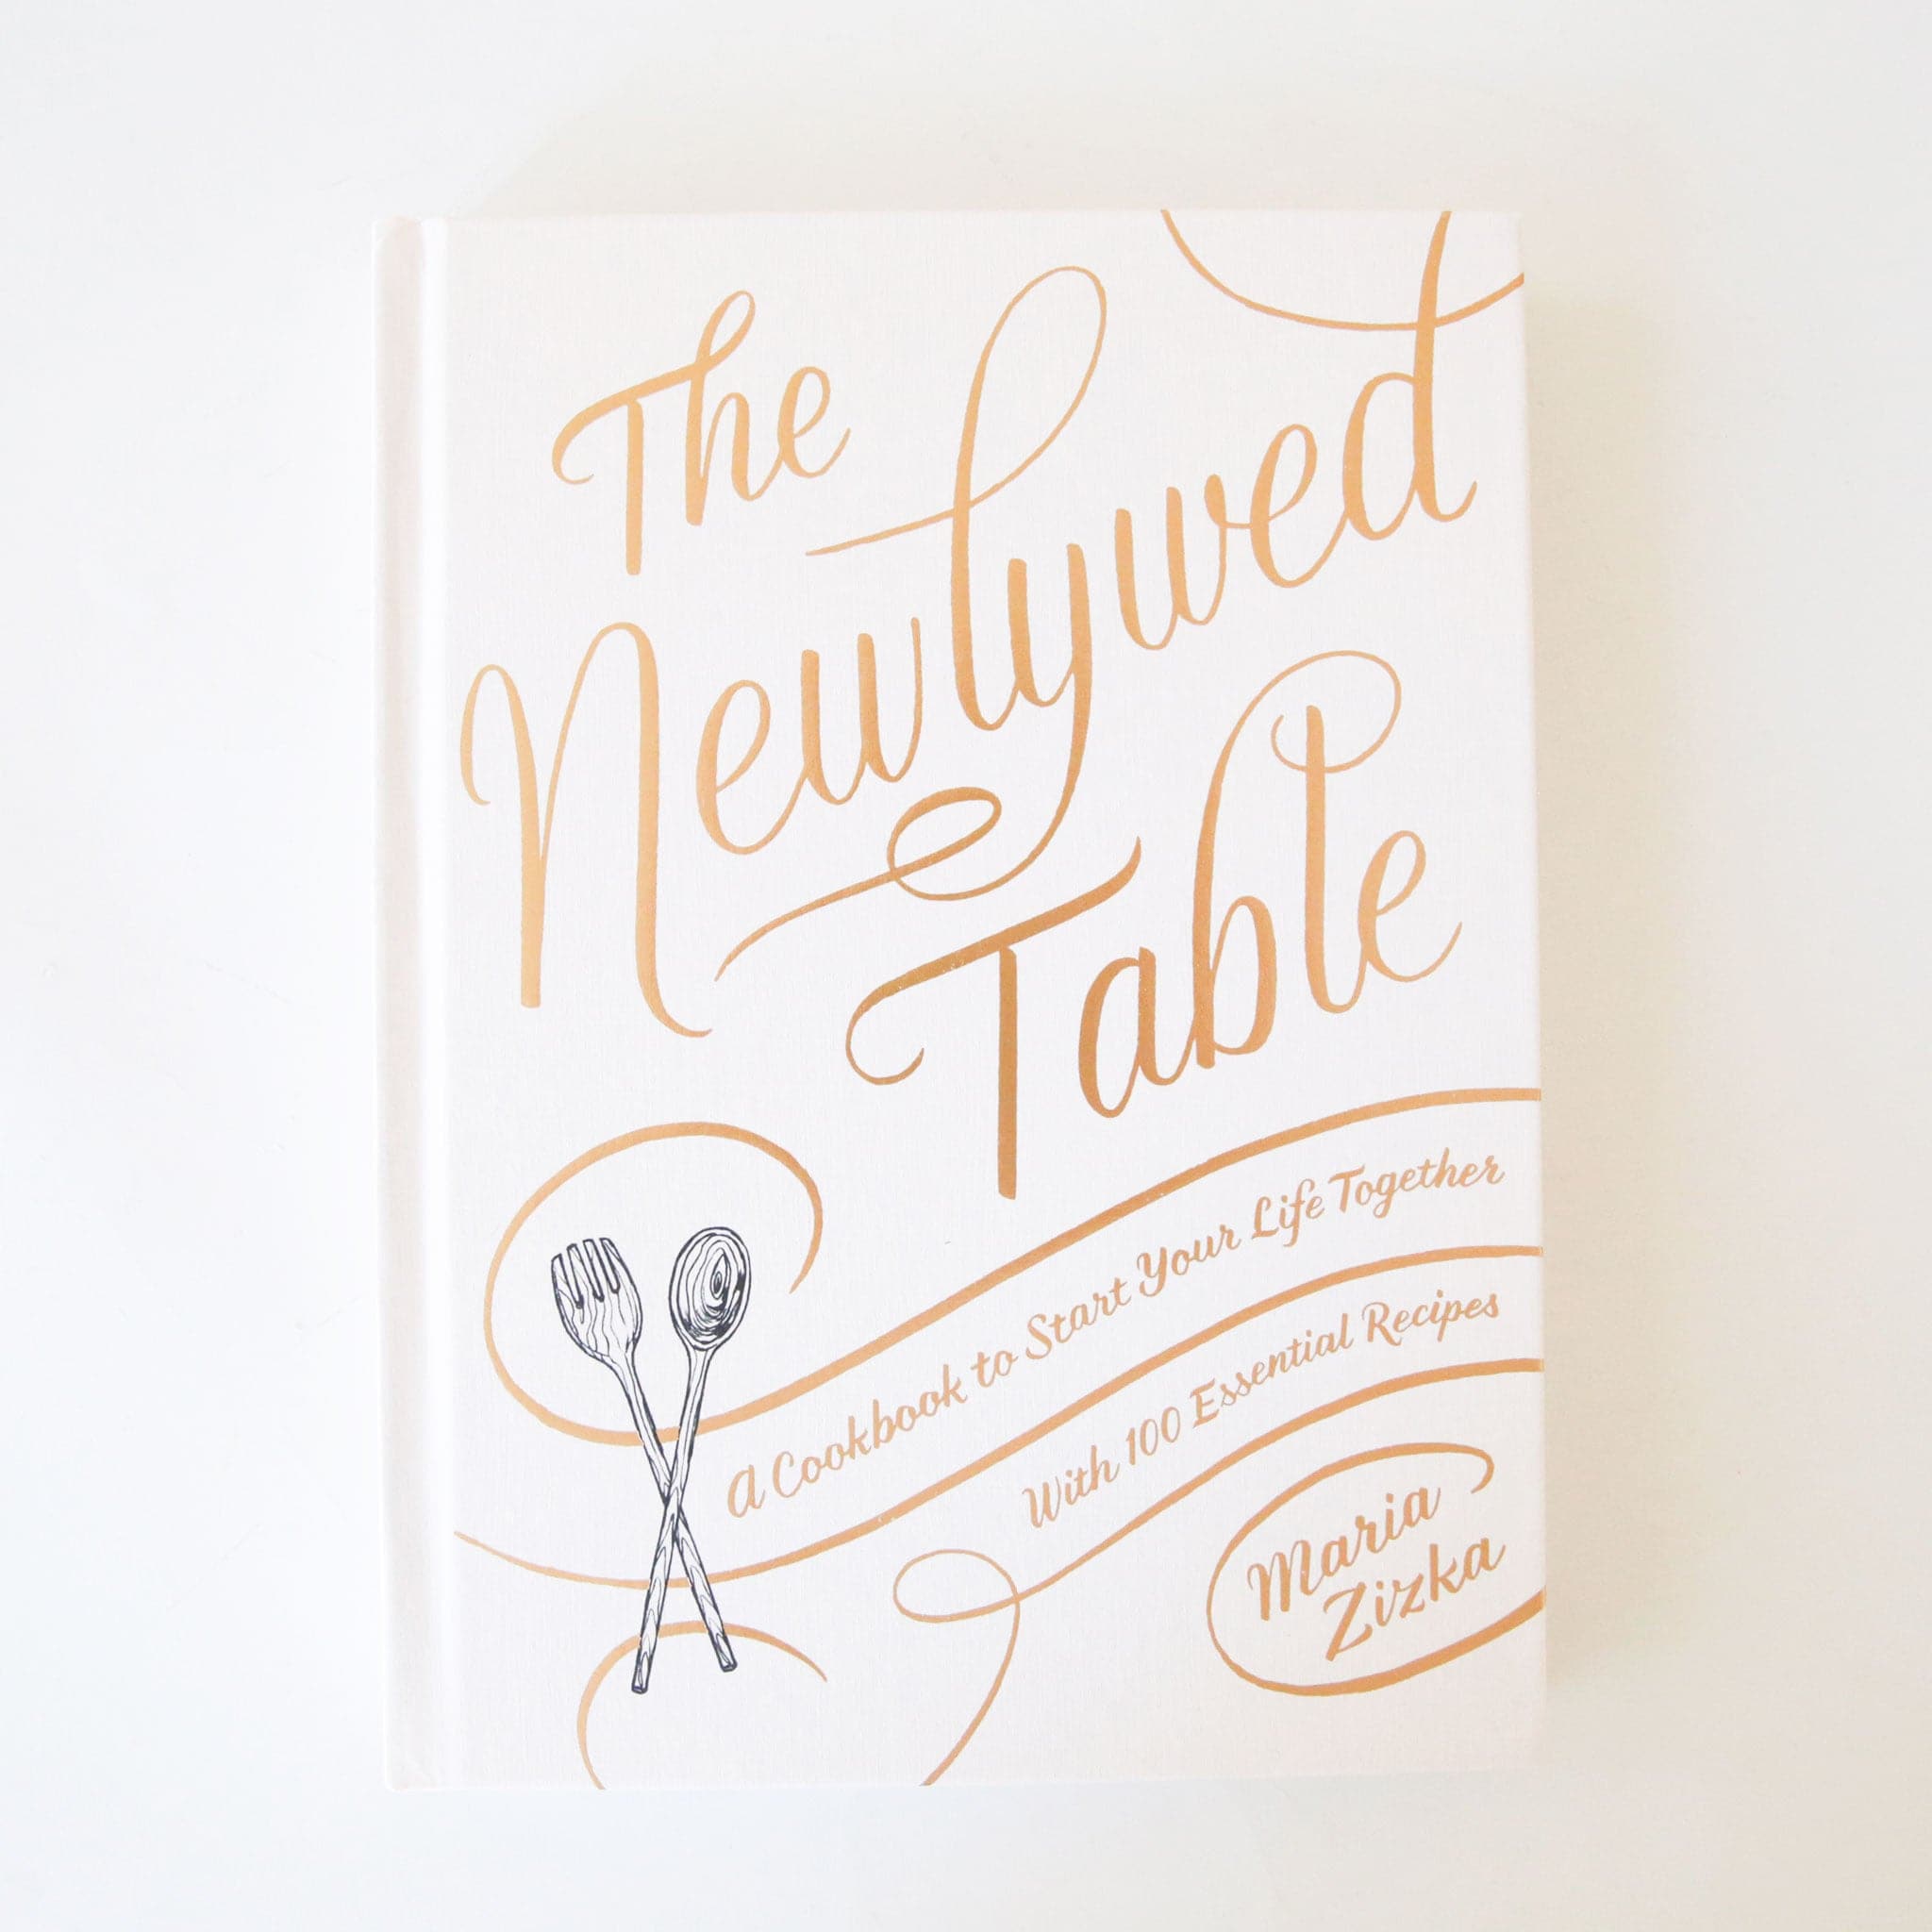 White hardcover book titled &#39;The newlywed table&#39; in gold foil cursive lettering. Below reads &#39;a cookbook to start your life together with 100 essential recipes&#39;. A black and white wooden spork and spoon sits in the bottom left corner. 